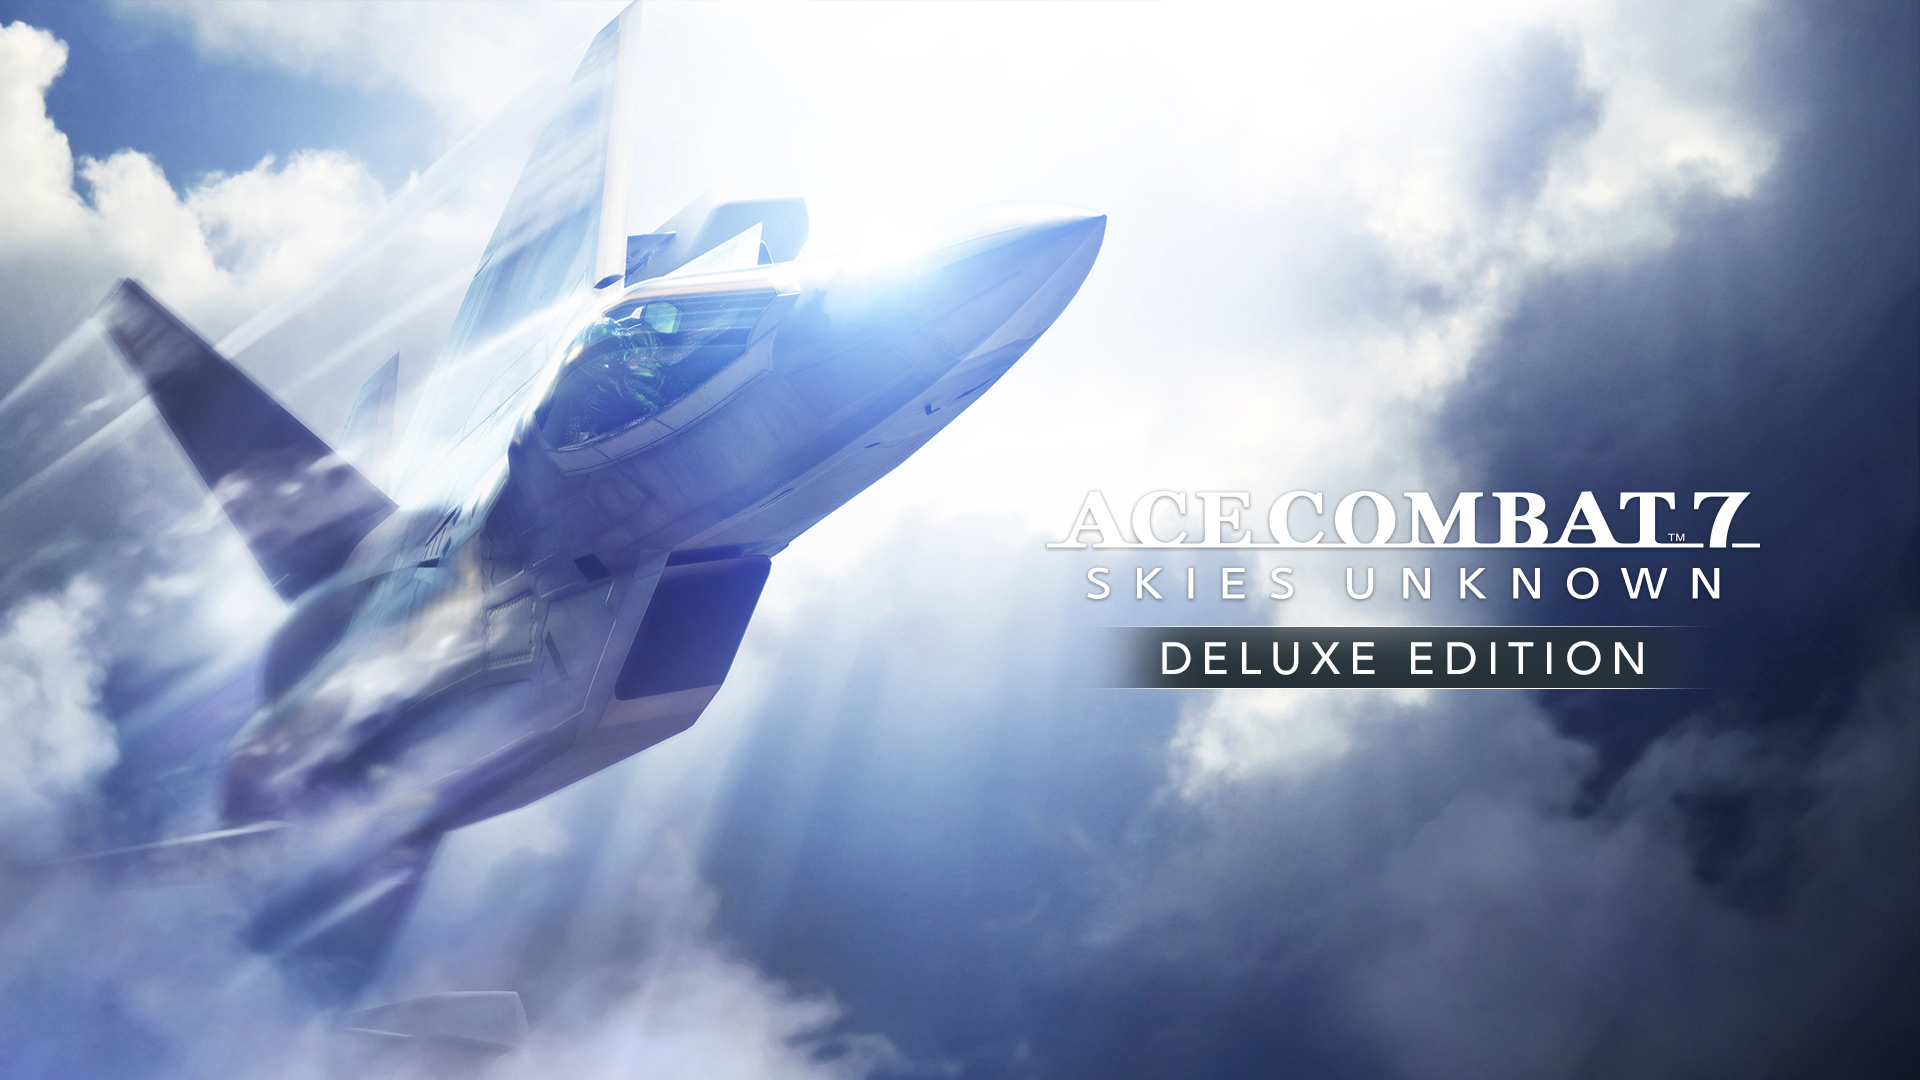 Image Ac7 Deluxe Edition Acepedia Fandom Powered By Wikia